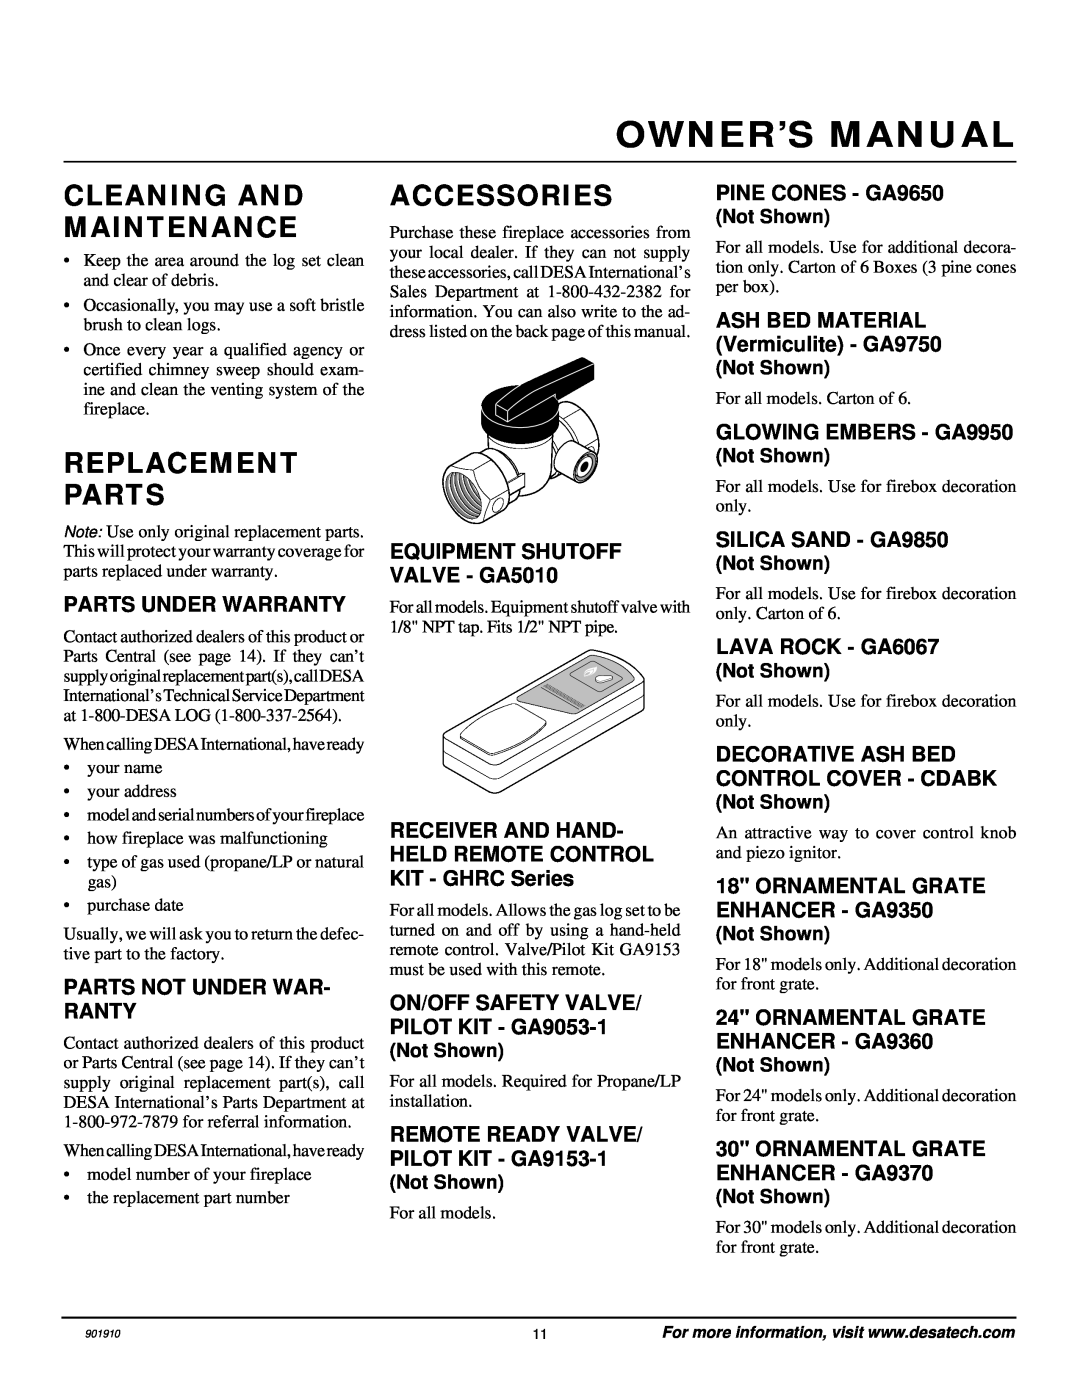 Desa 901910-01A.pdf installation manual Cleaning And Maintenance, Replacement Parts, Accessories 